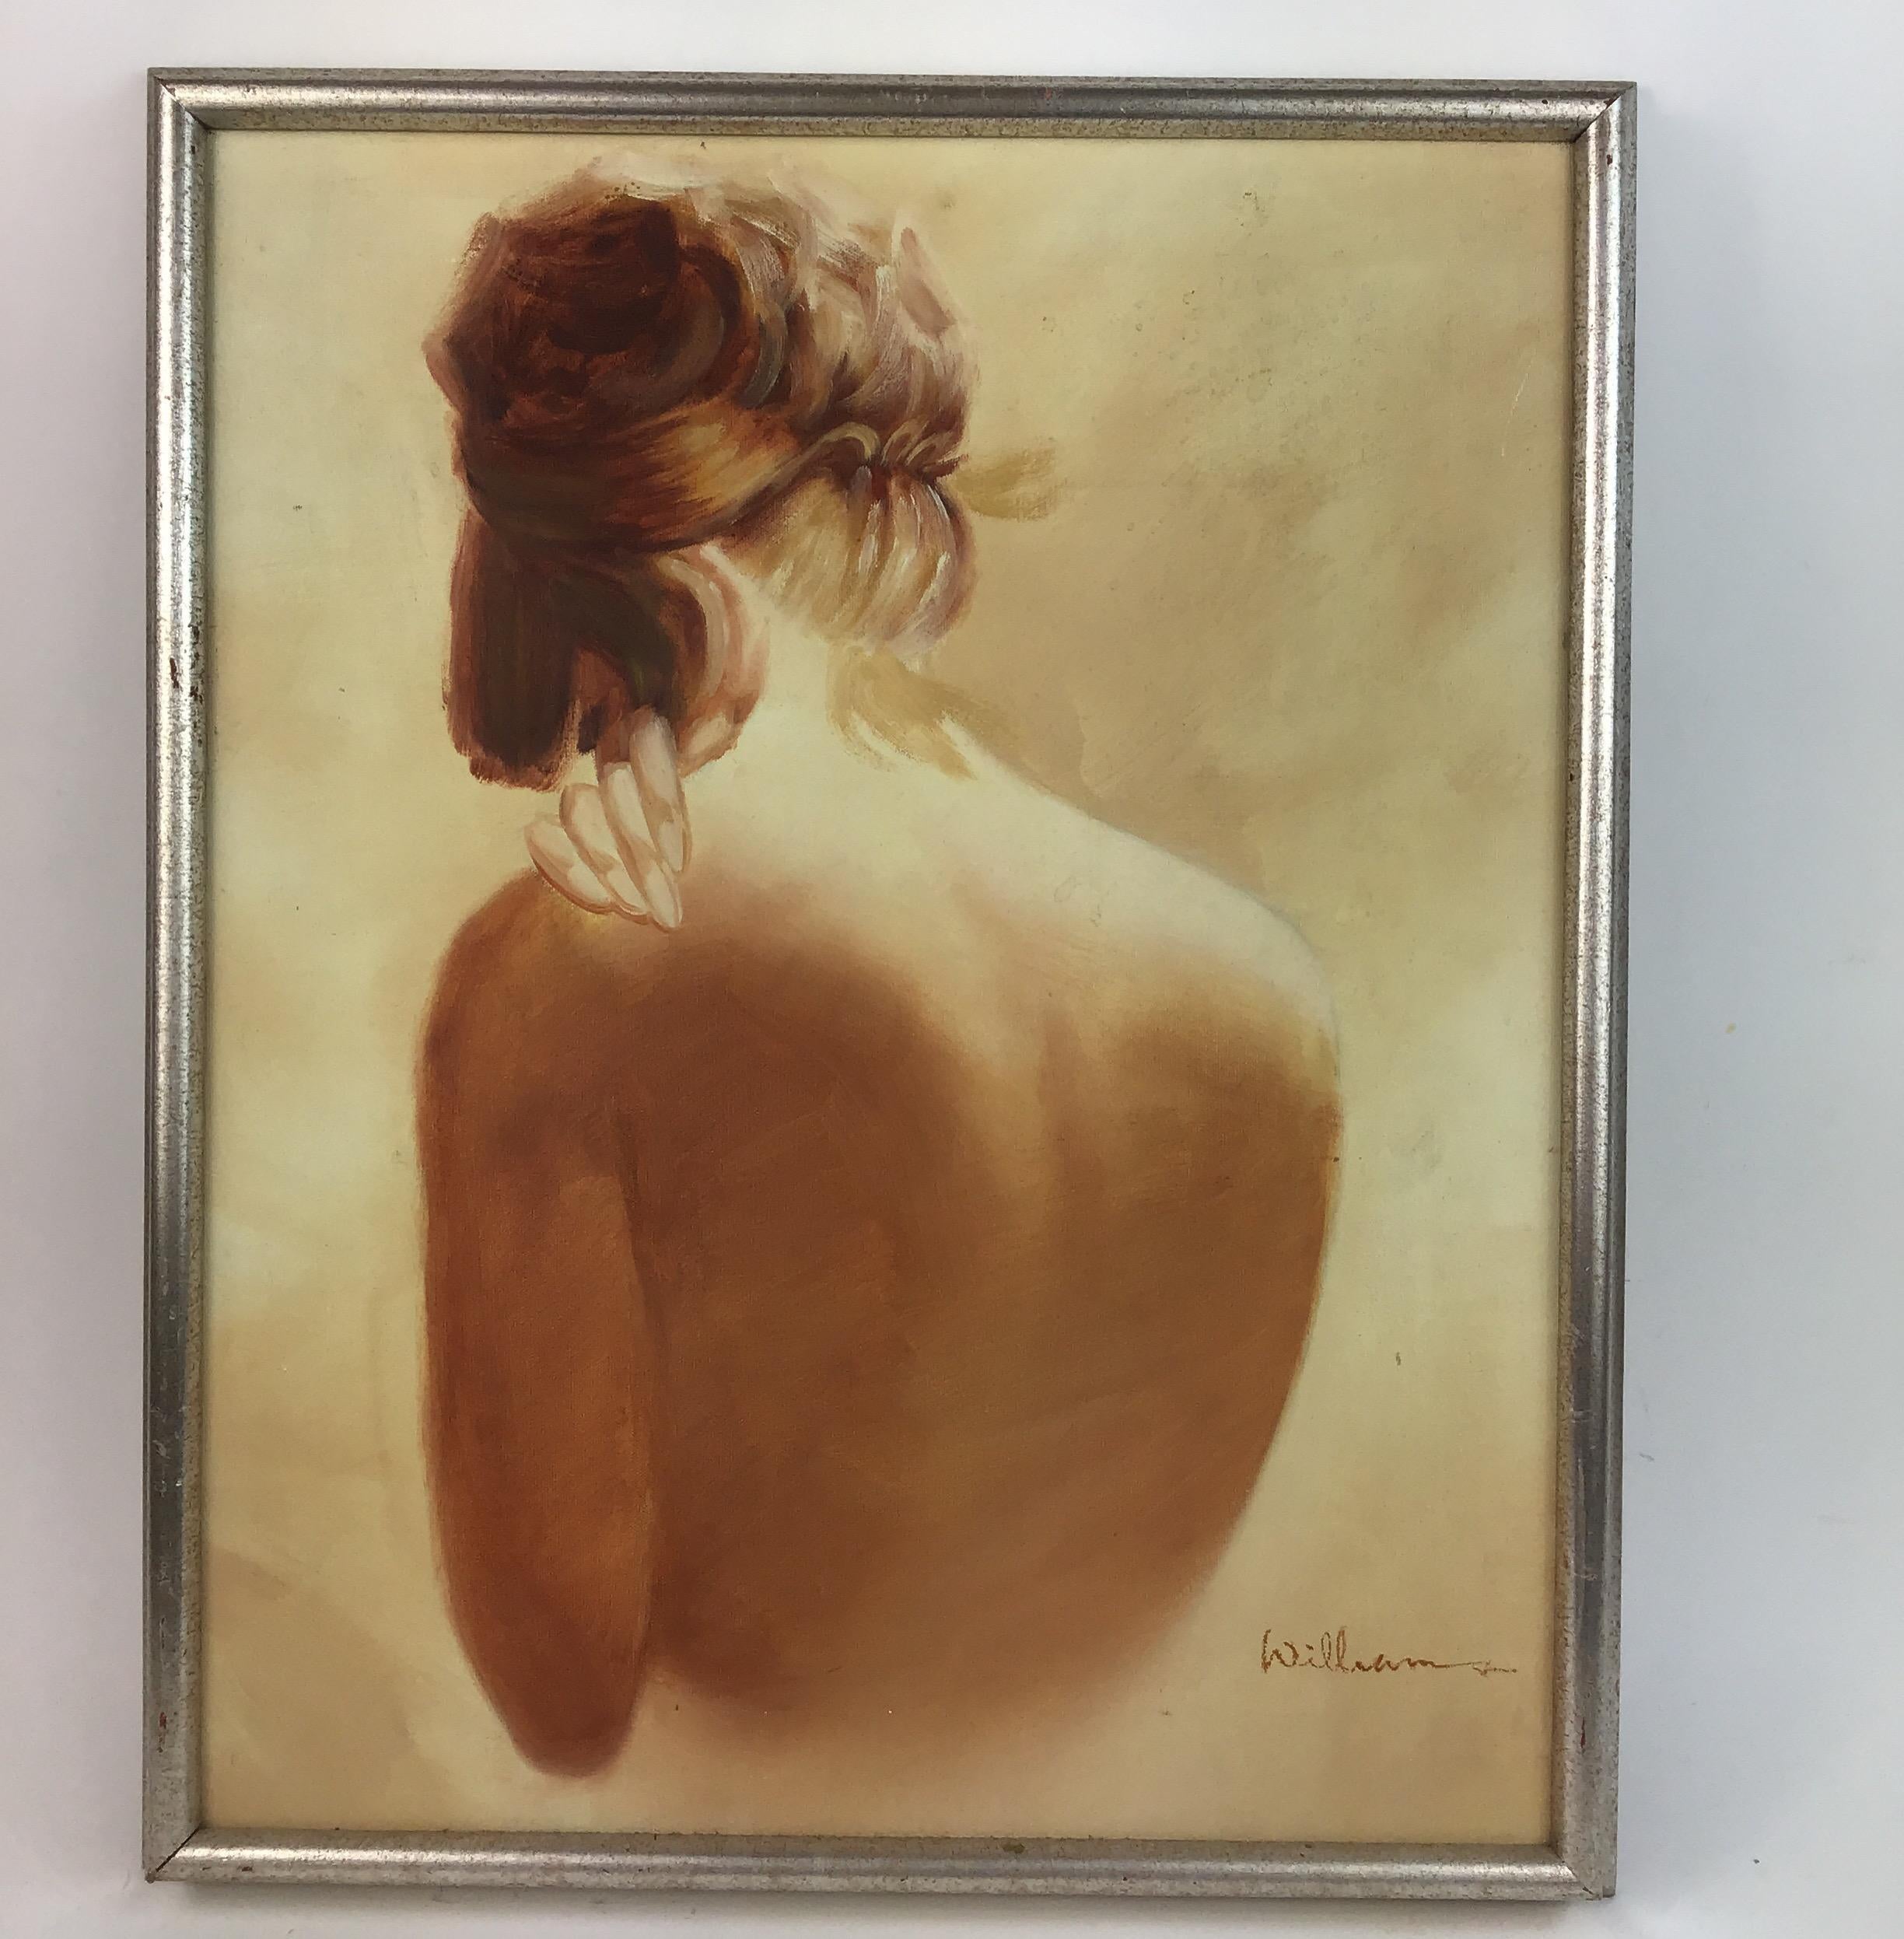 5-3425 Female Nude , oil on stretched canvas
Displayed in a silvered wood frame
Signed Williamson